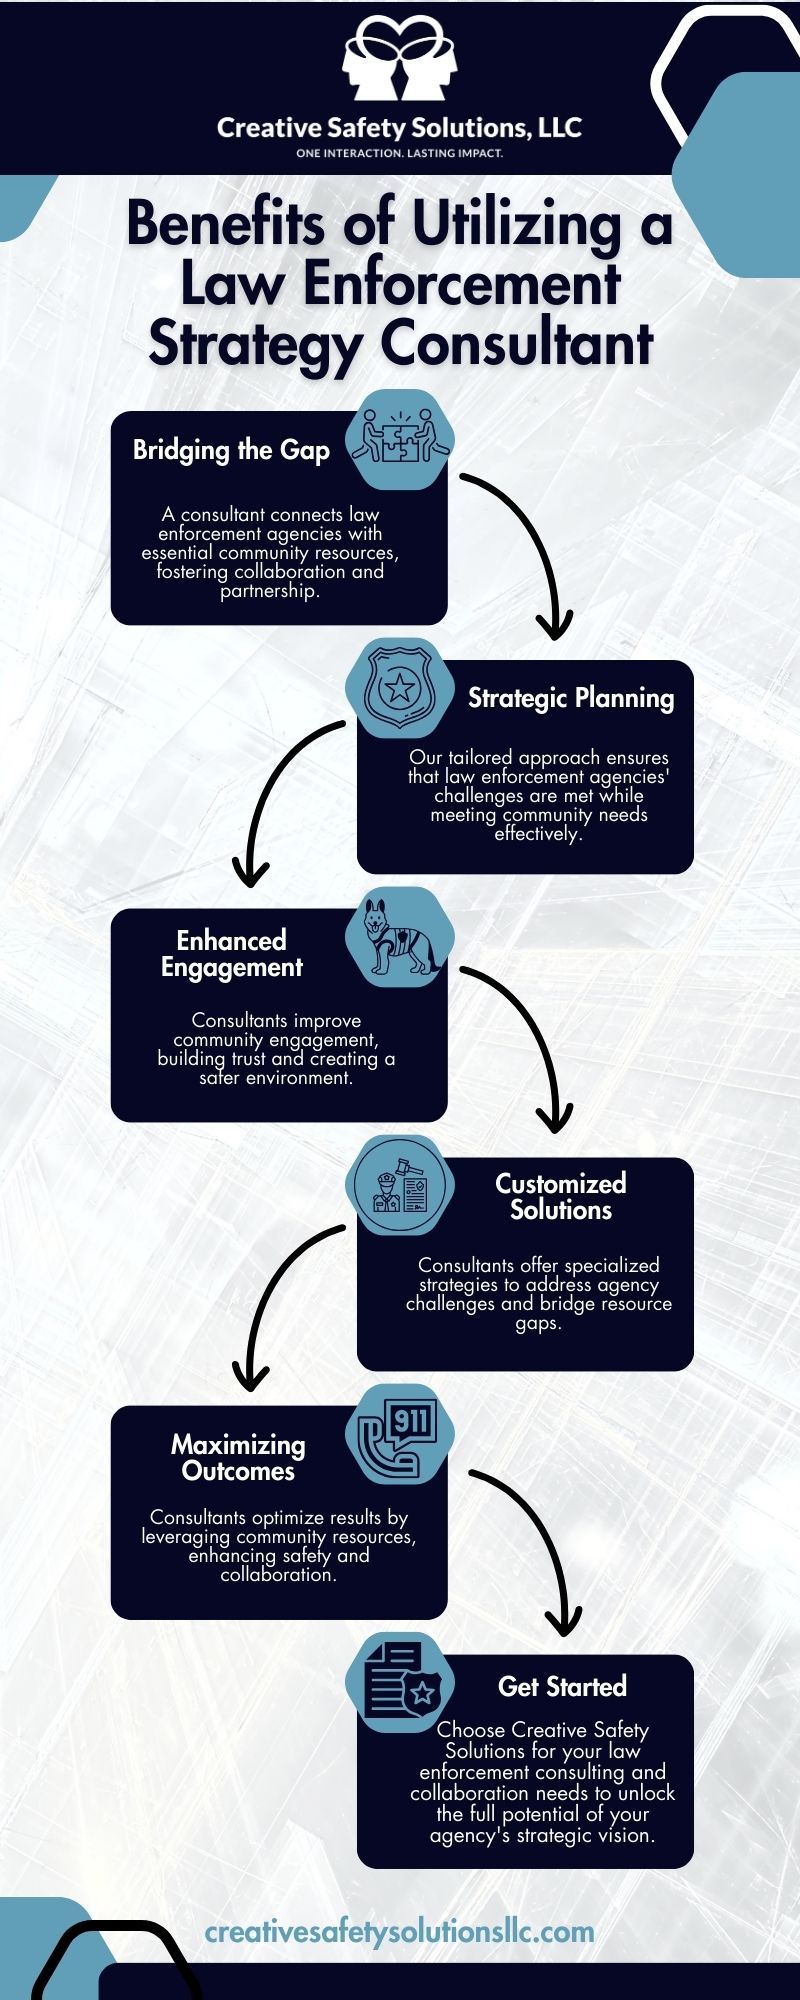 Benefits of Utilizing a Law Enforcement Strategy Consultant infographic